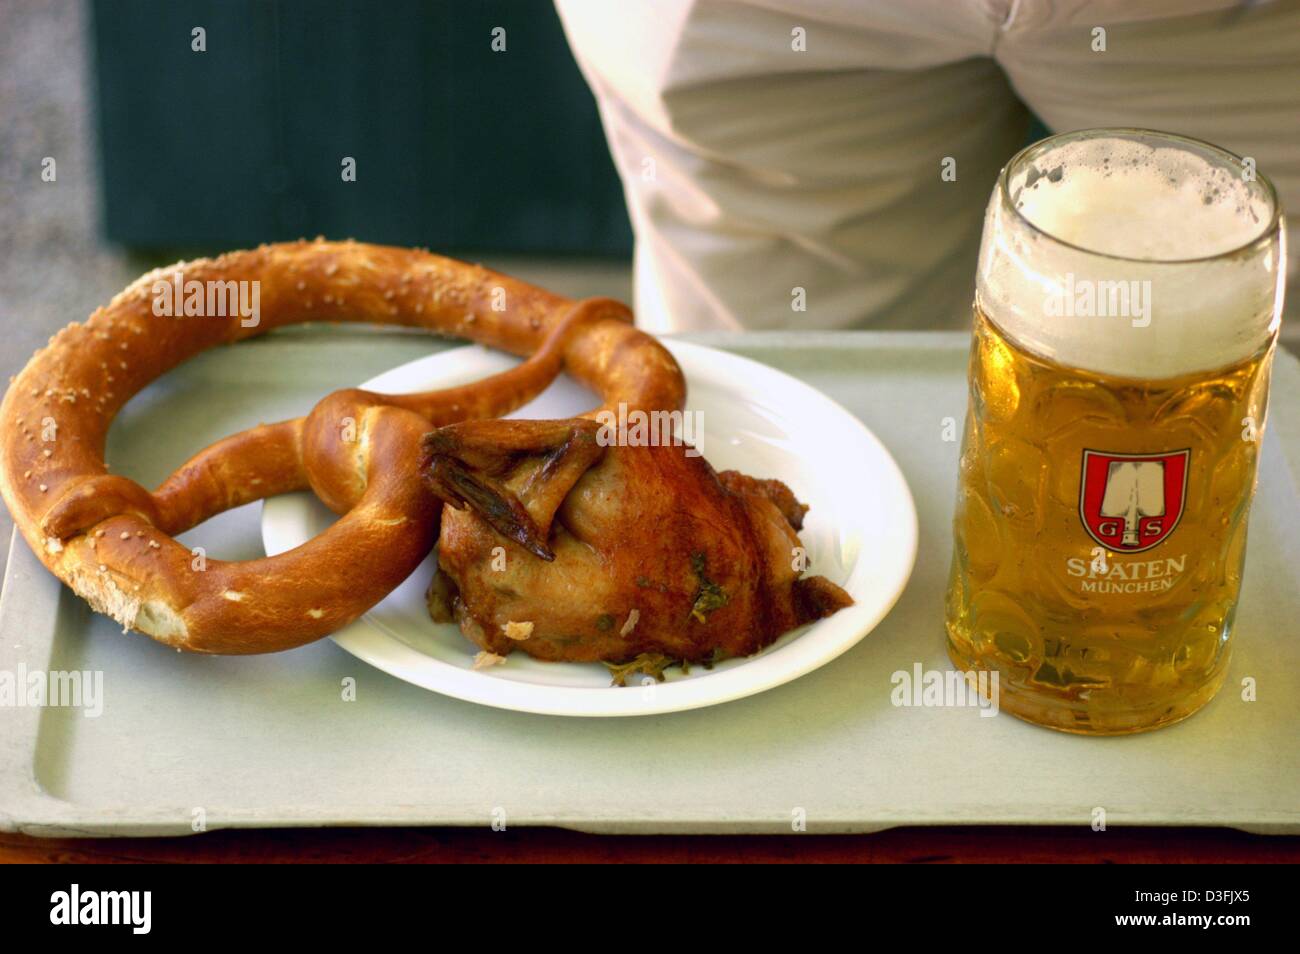 (dpa) - A typical Bavarian 'Brotzeit' (bread time), a stein of beer, a bretzel and a half chicken, is seen on a tray in the beer garden of the Waldwirtschaft pub, located in Grosshesselohe just outside Munich, 14 June 2003. The beer garden is said to be one of the most beautiful beer gardens in Bavaria due to its location in the Isar Valley. The open air pub offers a traditional ki Stock Photo